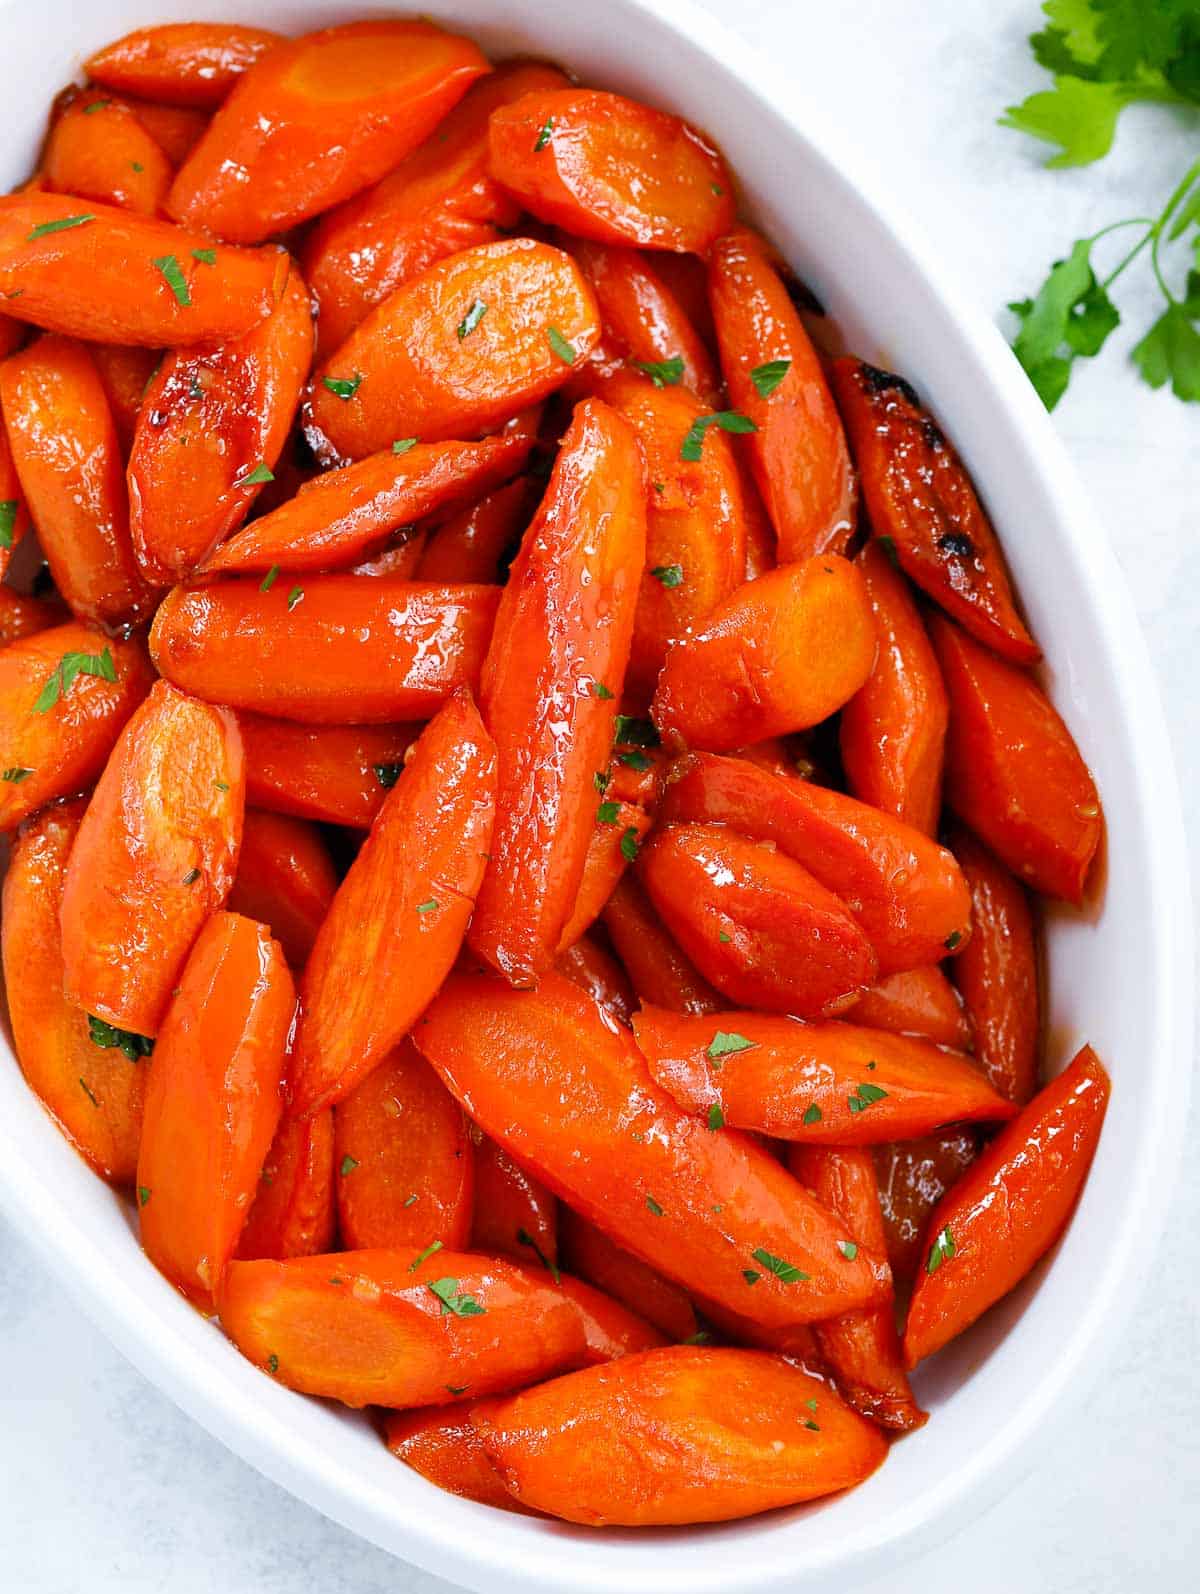 Brown Sugar Glazed Carrots - BBQ Side Dishes